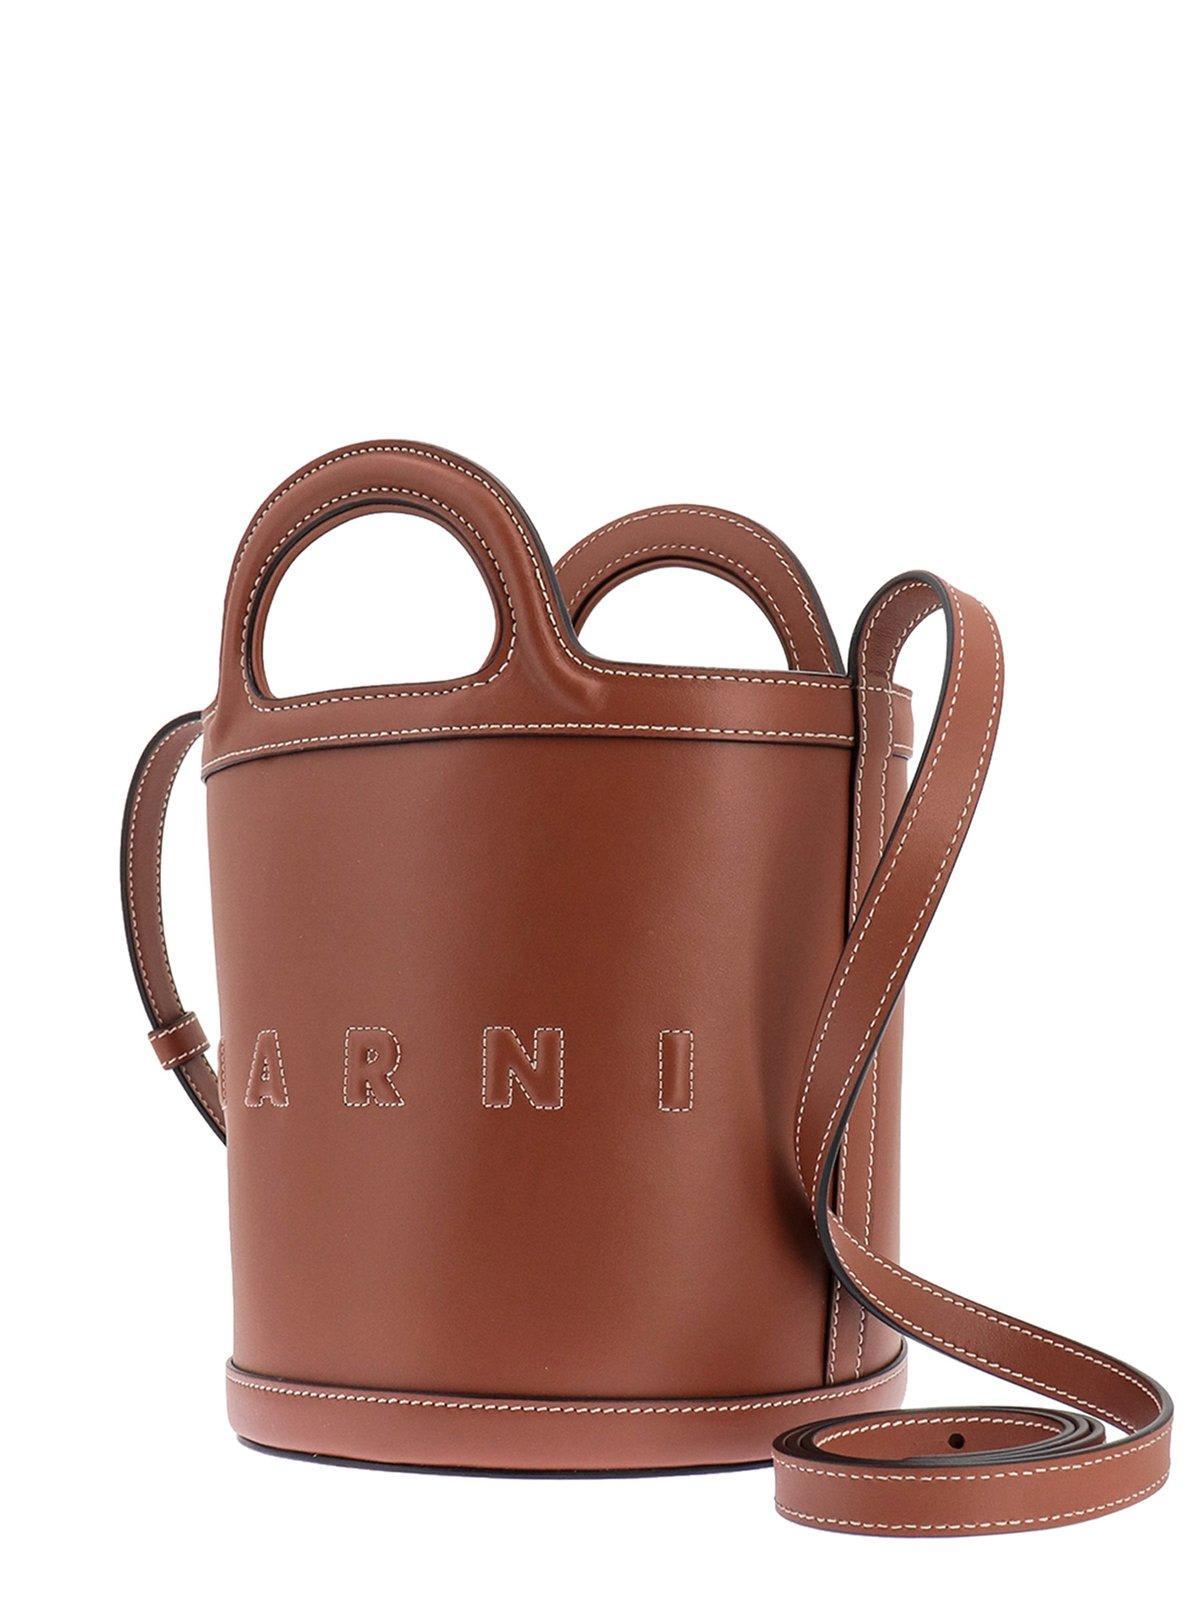 Tropicalia Small Bucket Bag in brown leather